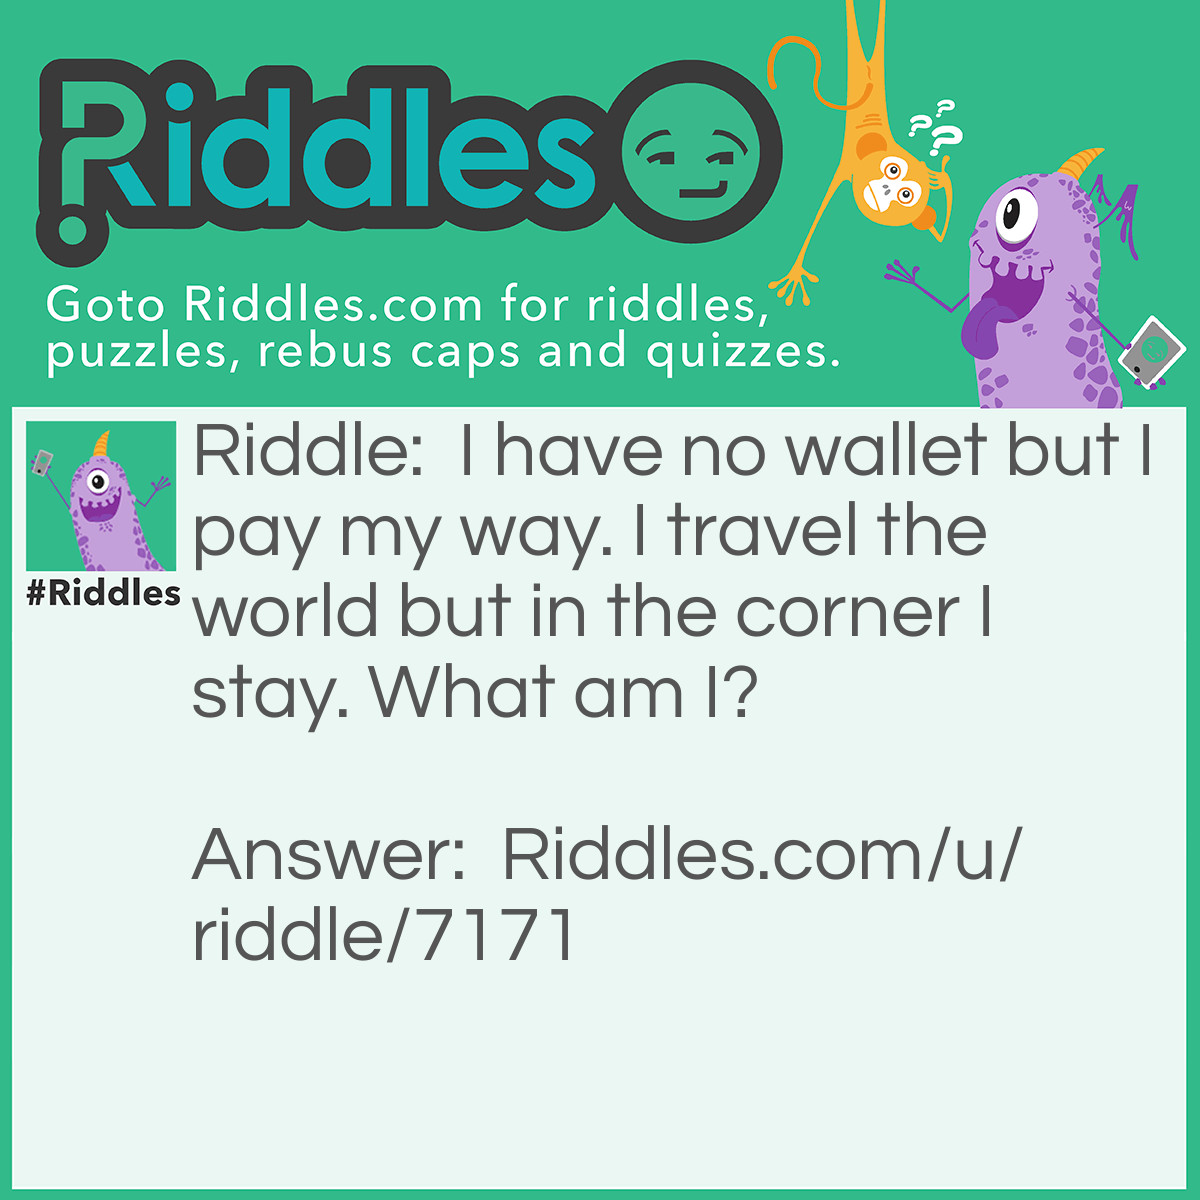 Riddle: I have no wallet but I pay my way. I travel the world but in the corner I stay. What am I? Answer: A stamp.